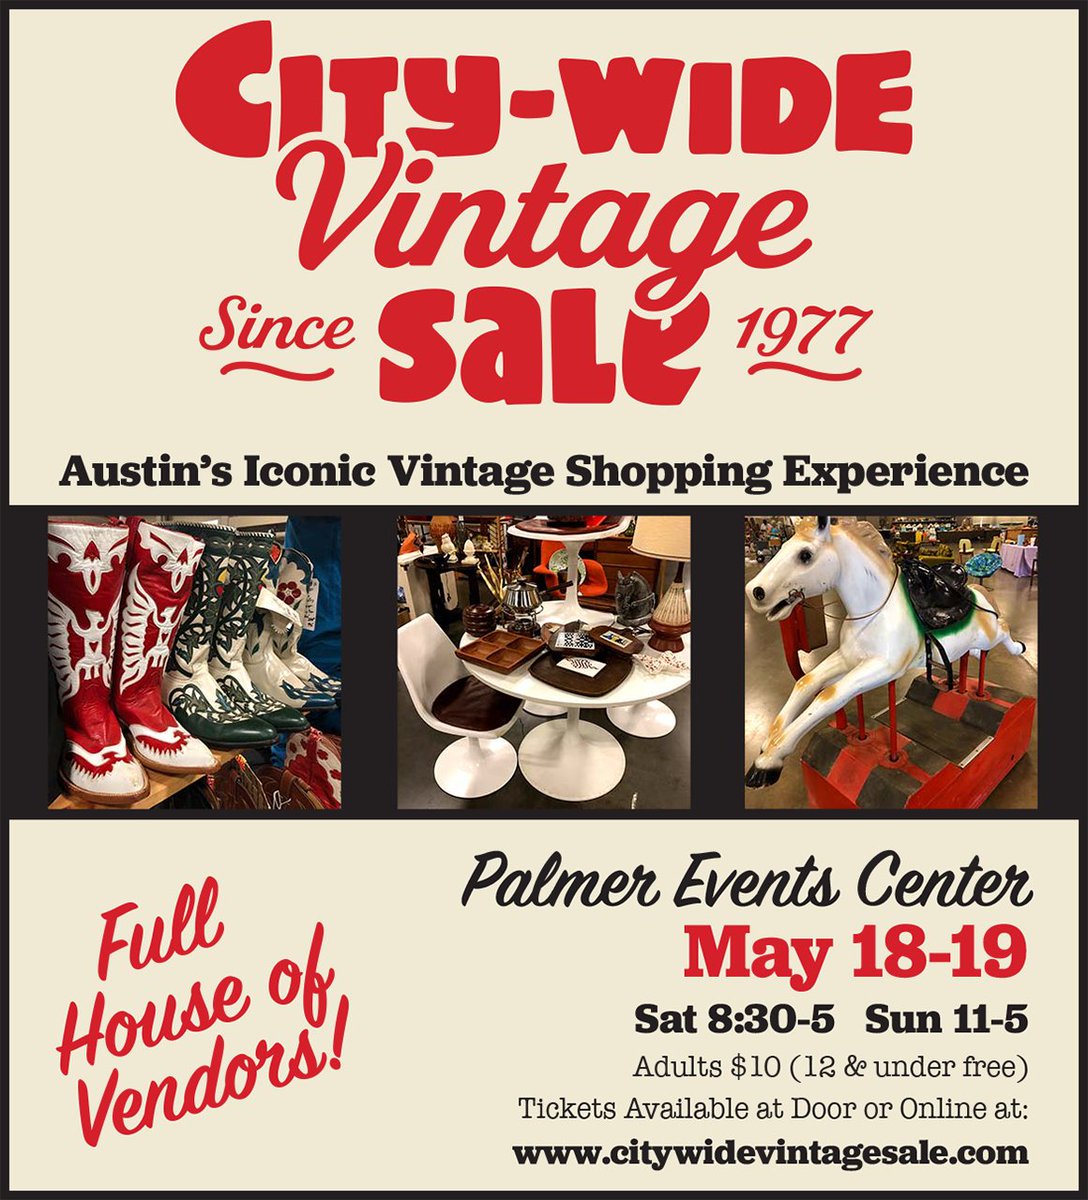 The City-Wide Vintage Sale is Austin's largest vintage market. This one-of-a-kind events showcase 80-100 vintage vendors from across Texas and beyond, and it's back starting TODAY. Details + tickets here. bit.ly/3V51gVb